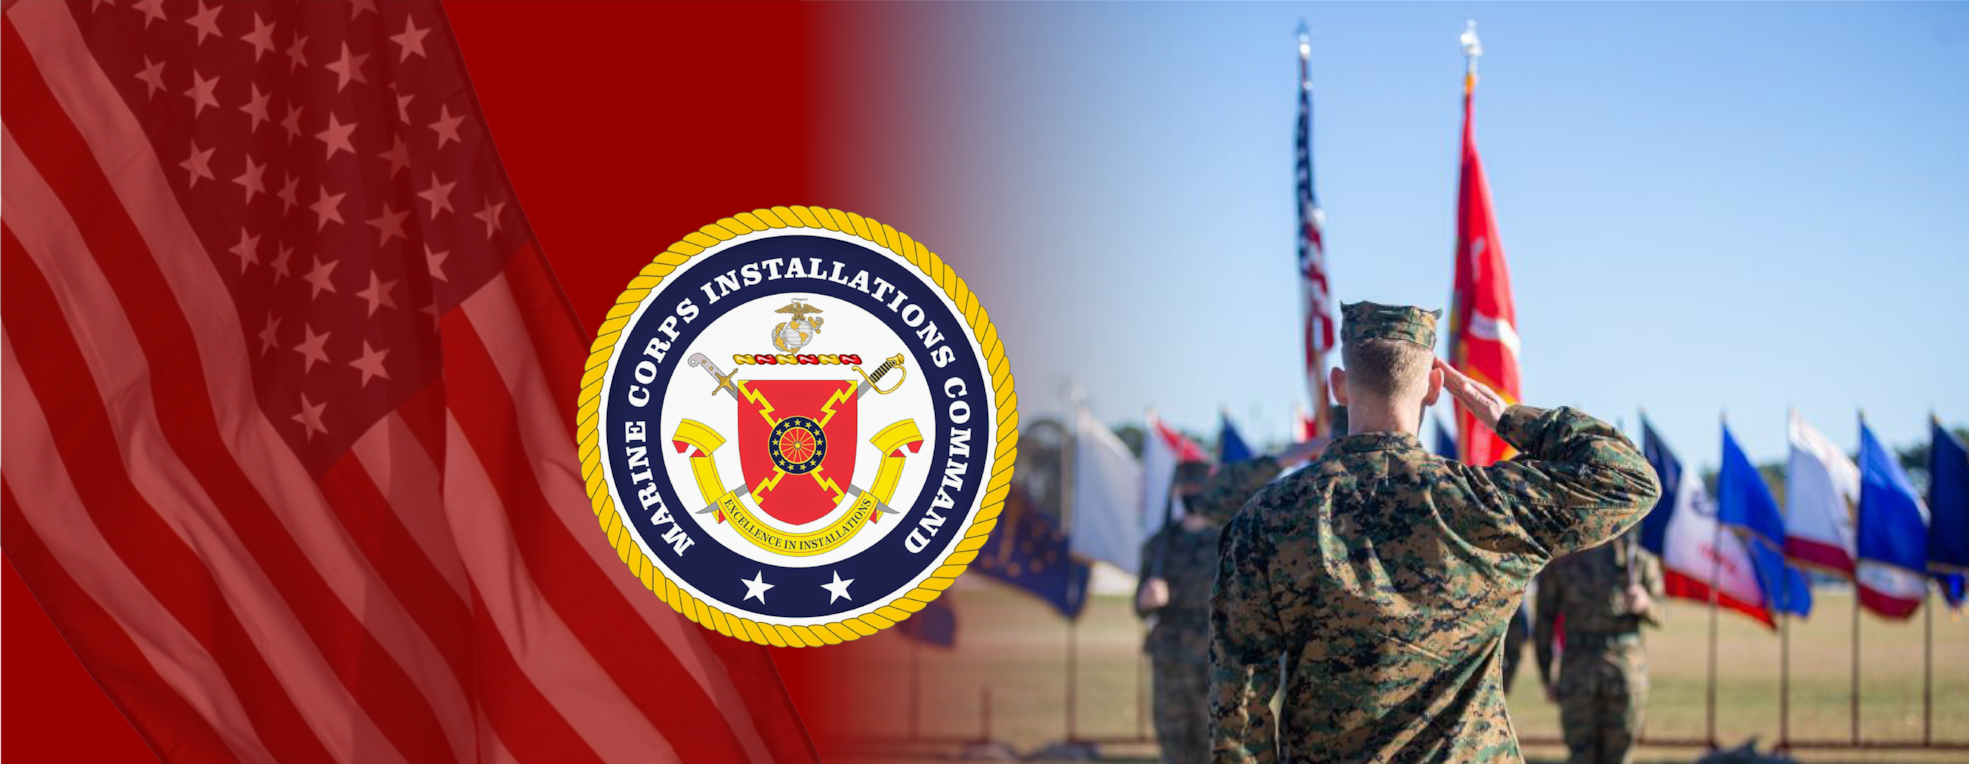 From left to right: The American flag covered with red gradient, MCICOM coat of arms, and a photo of a Marine saluting various flags.